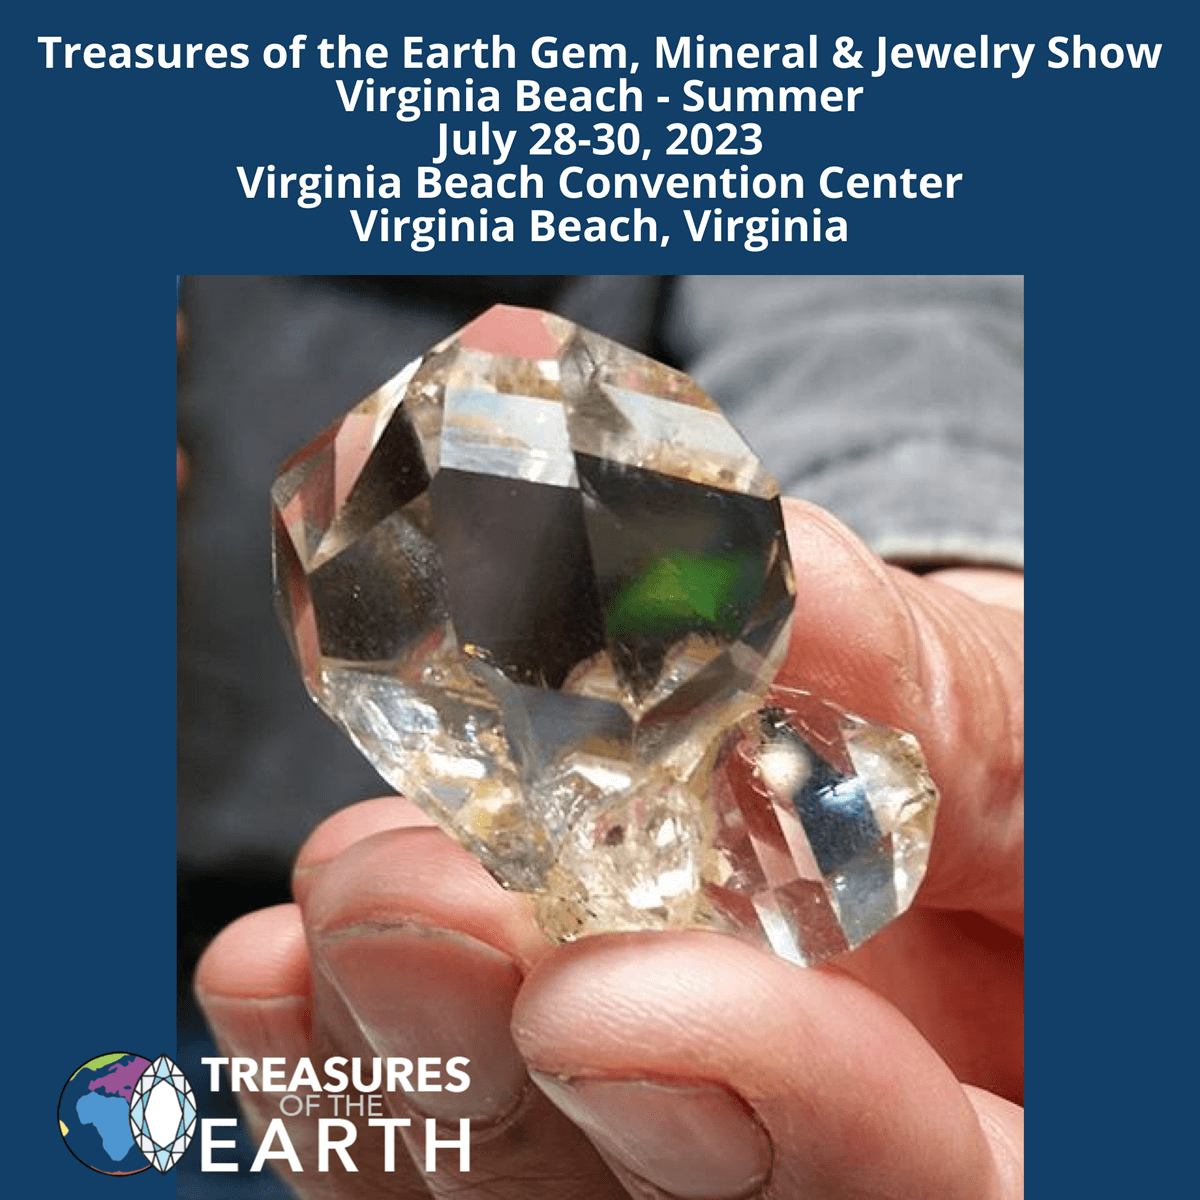 Treasures of the Earth Gem, Mineral & Jewelry Show - Virginia Beach - Summer 2023